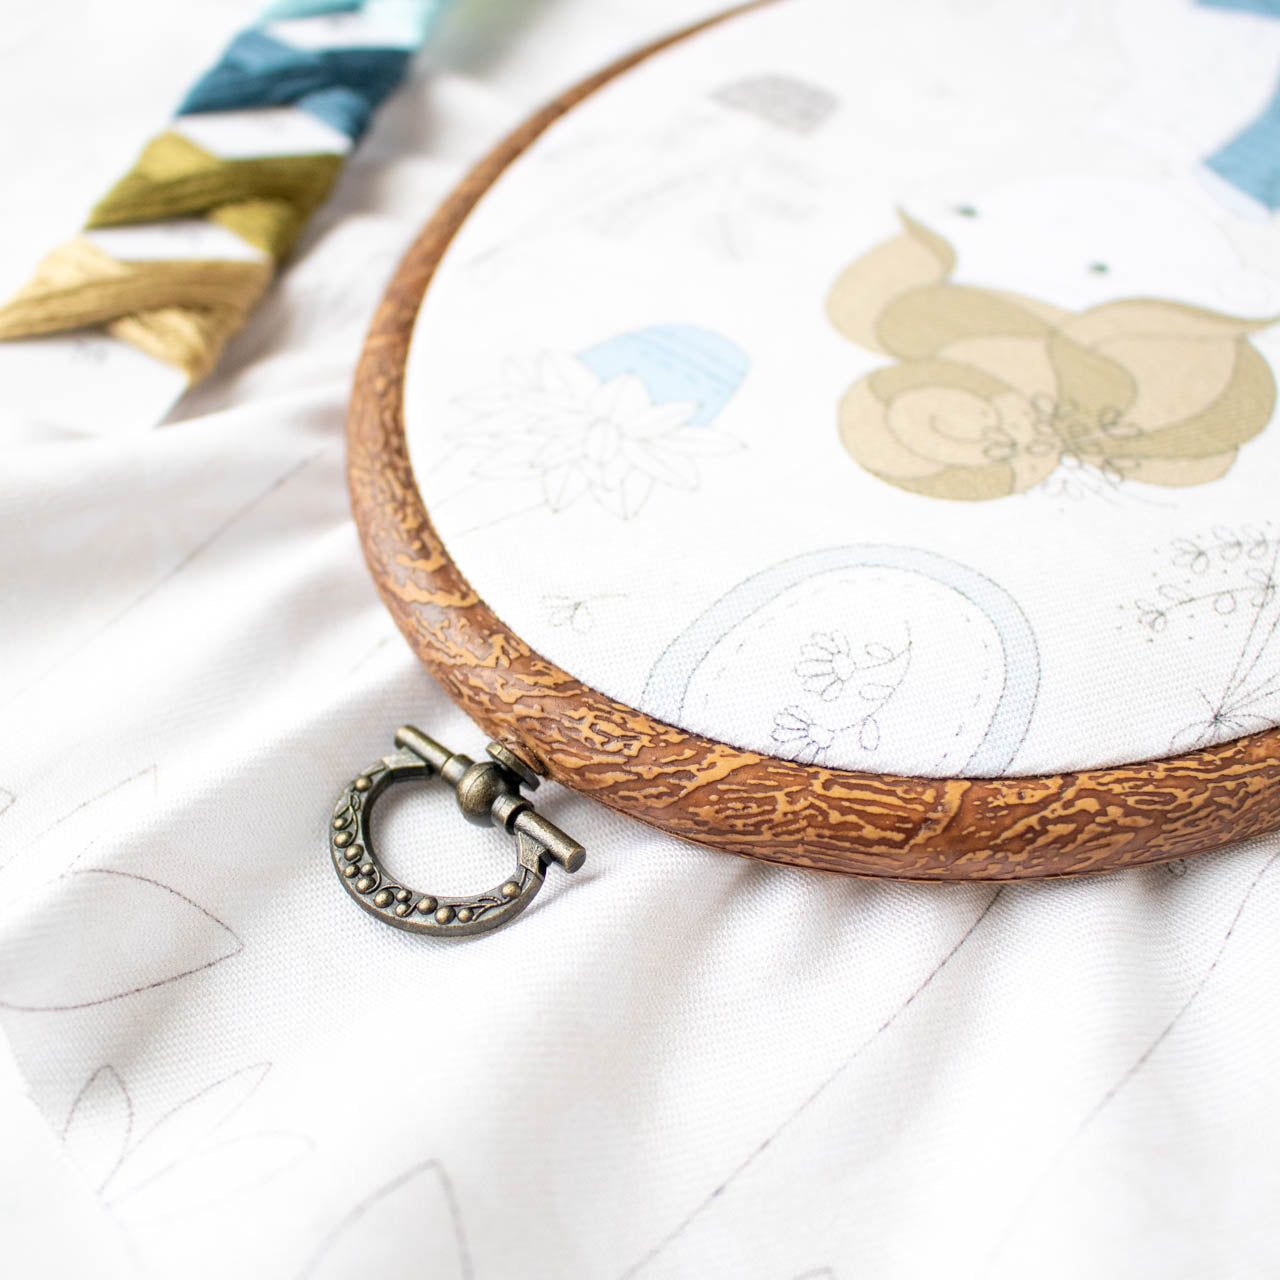 Oval Wood Embroidery Hoops